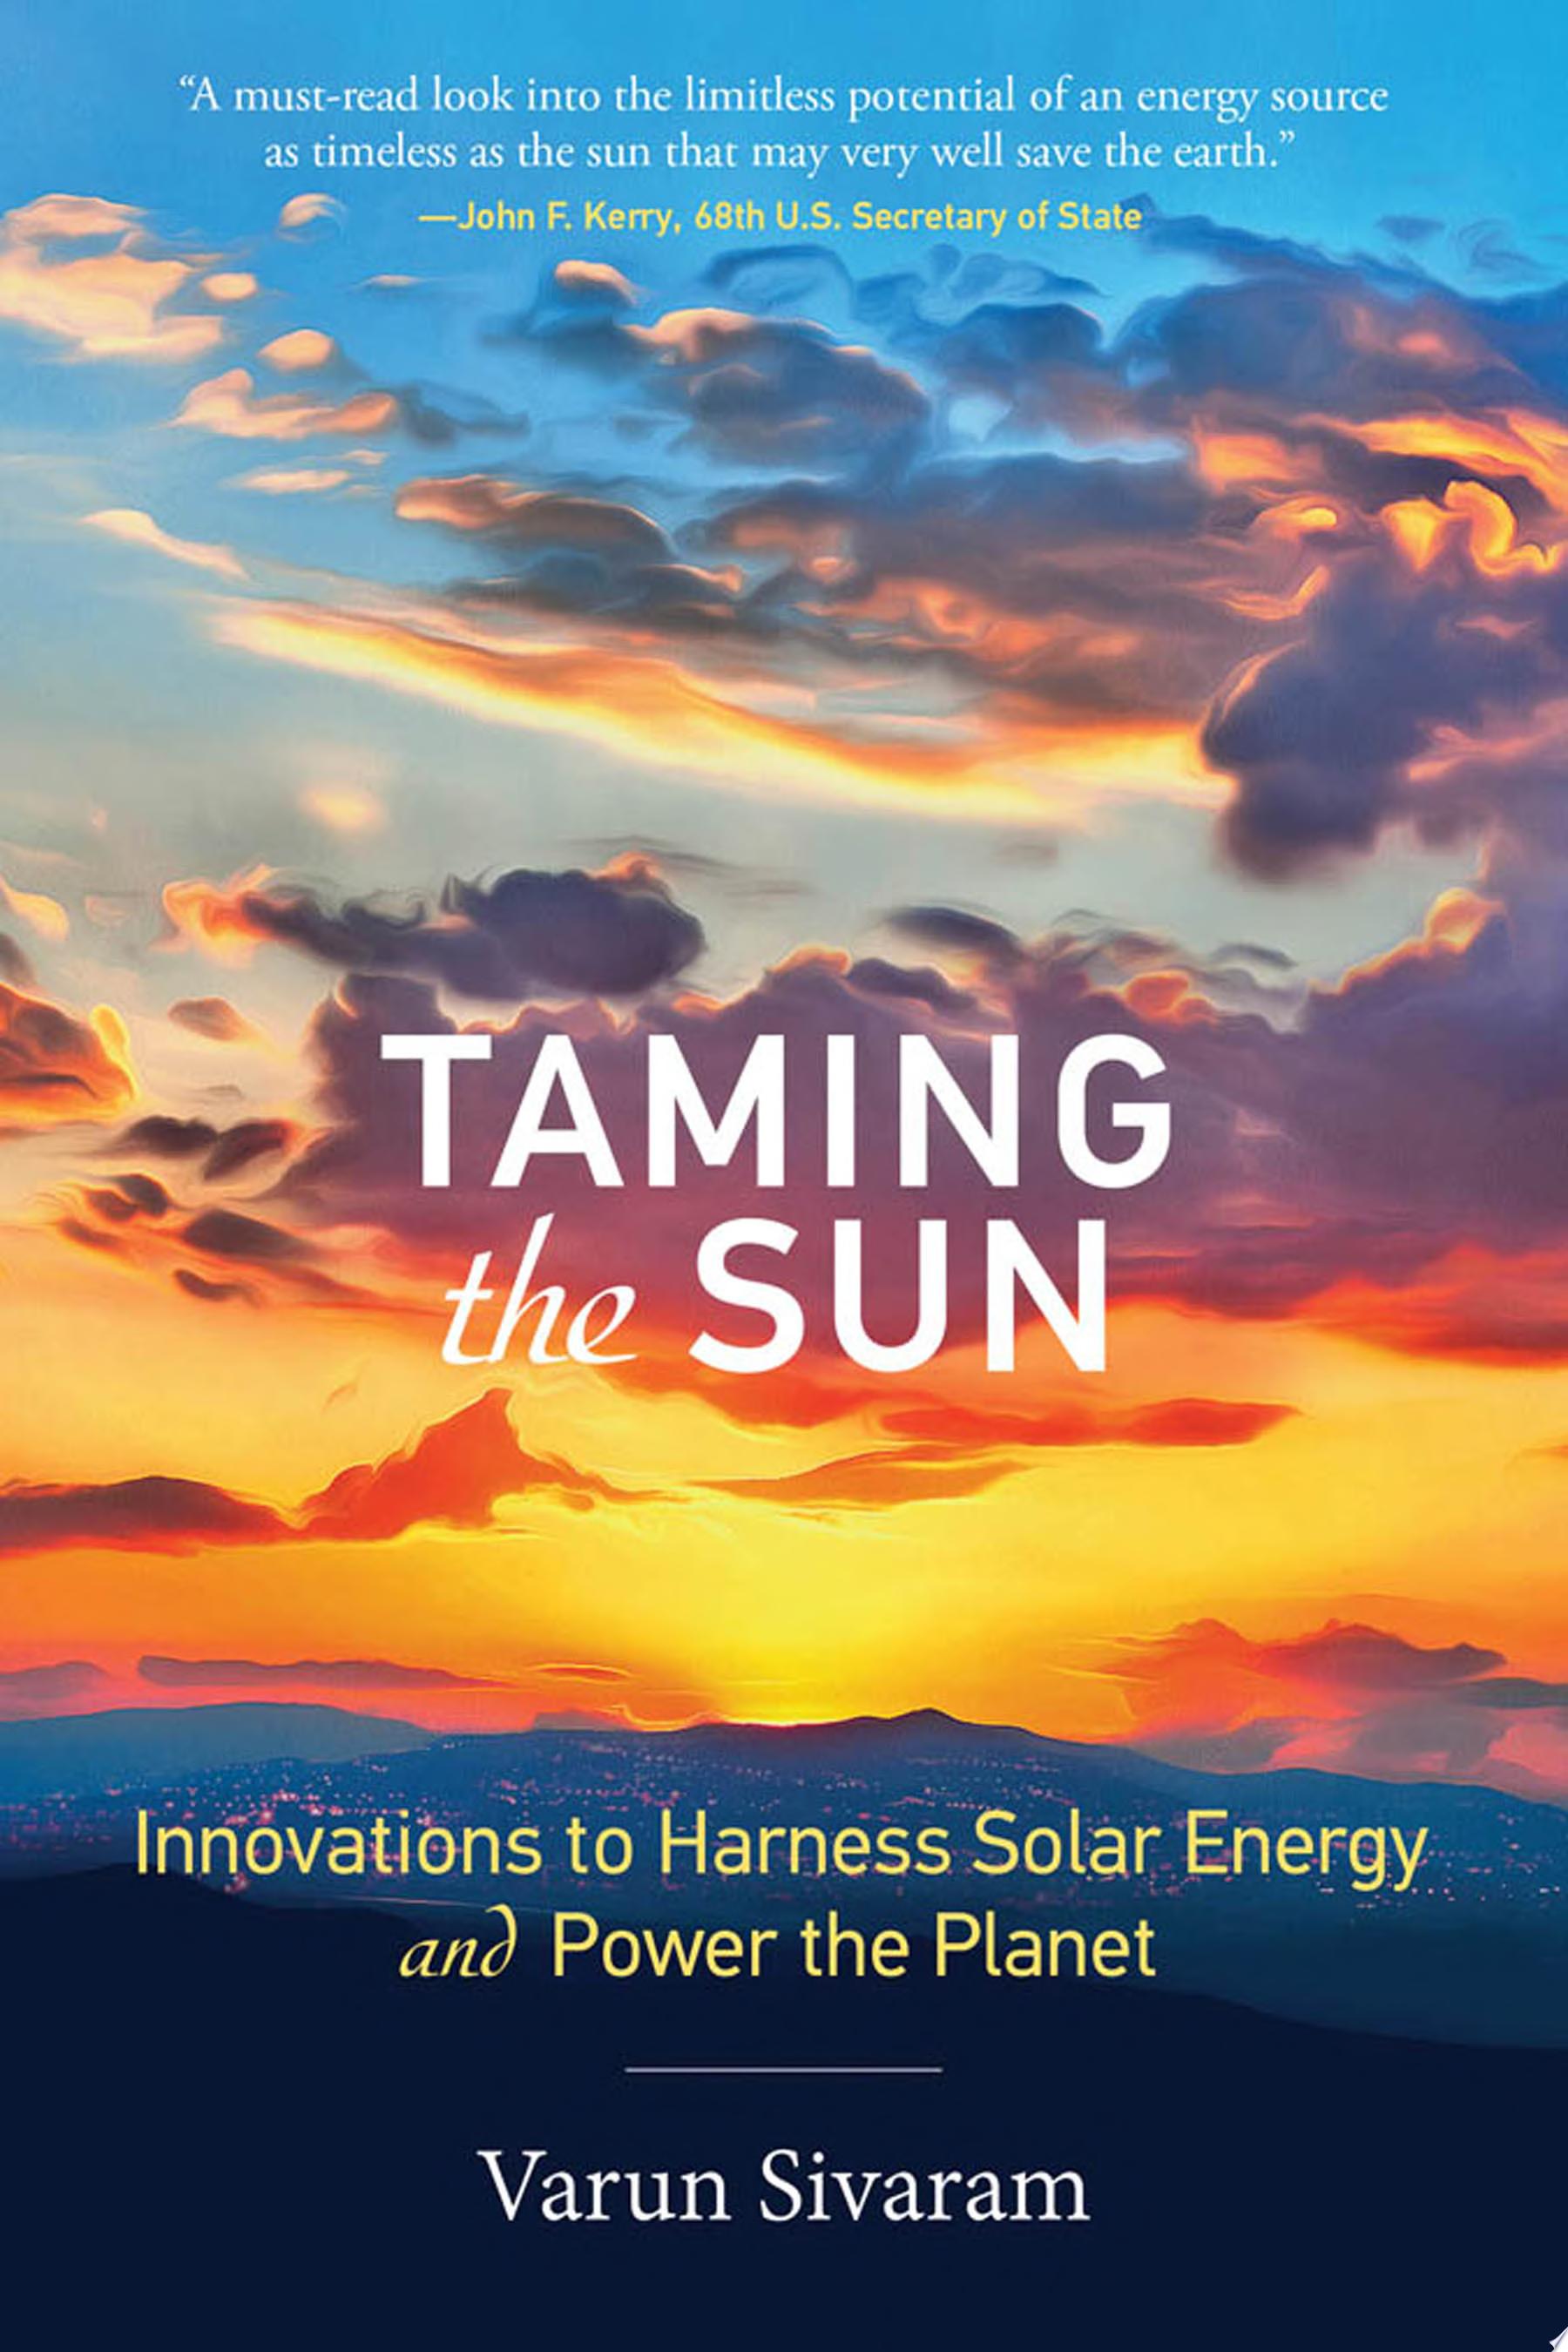 Image for "Taming the Sun"